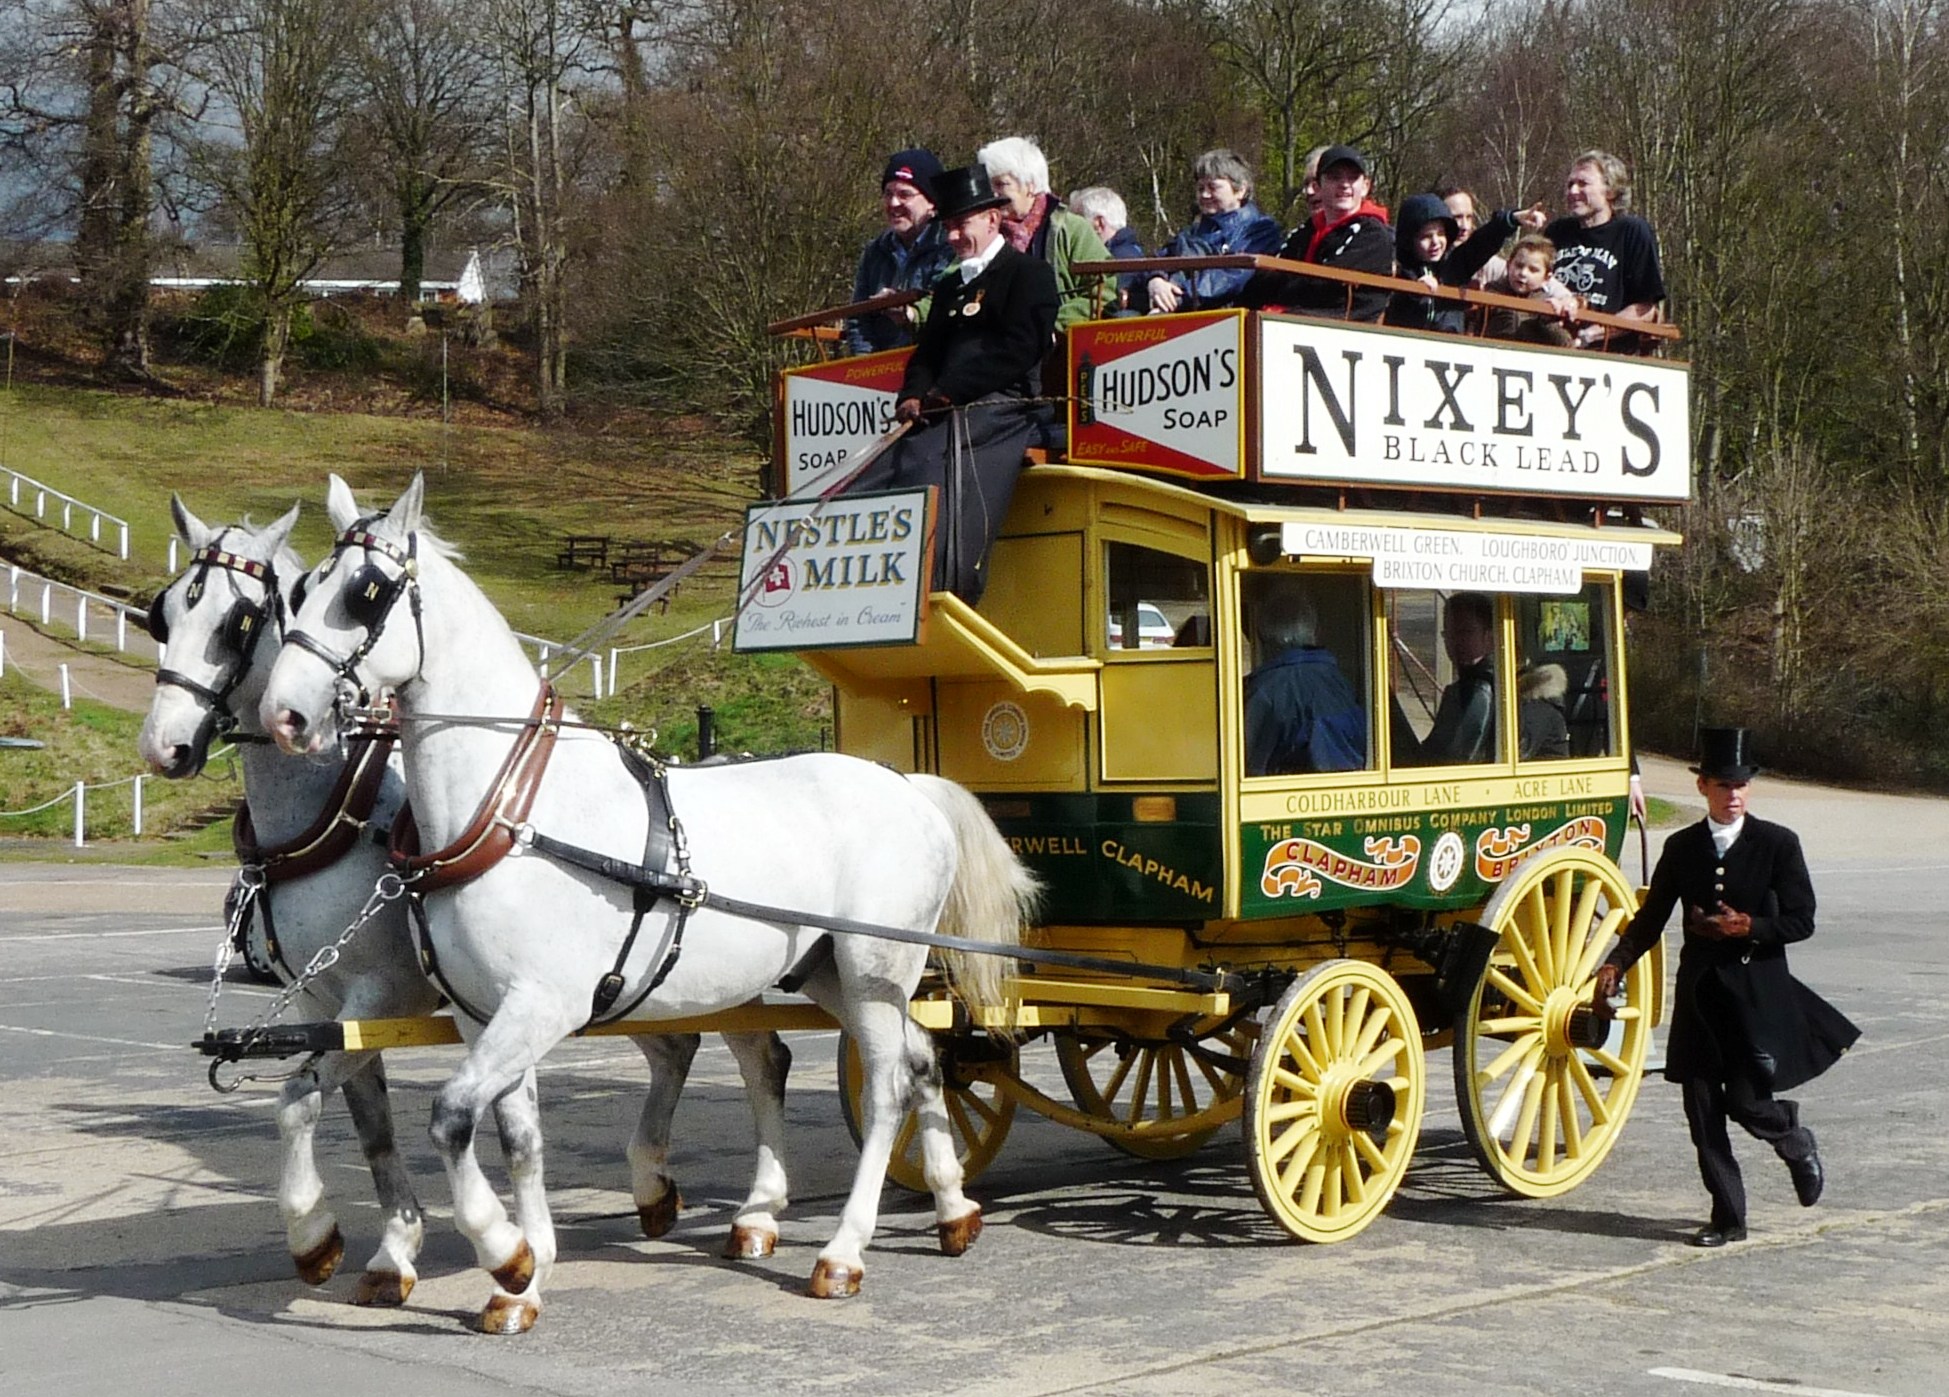 People riding on a Nixey's horse bus